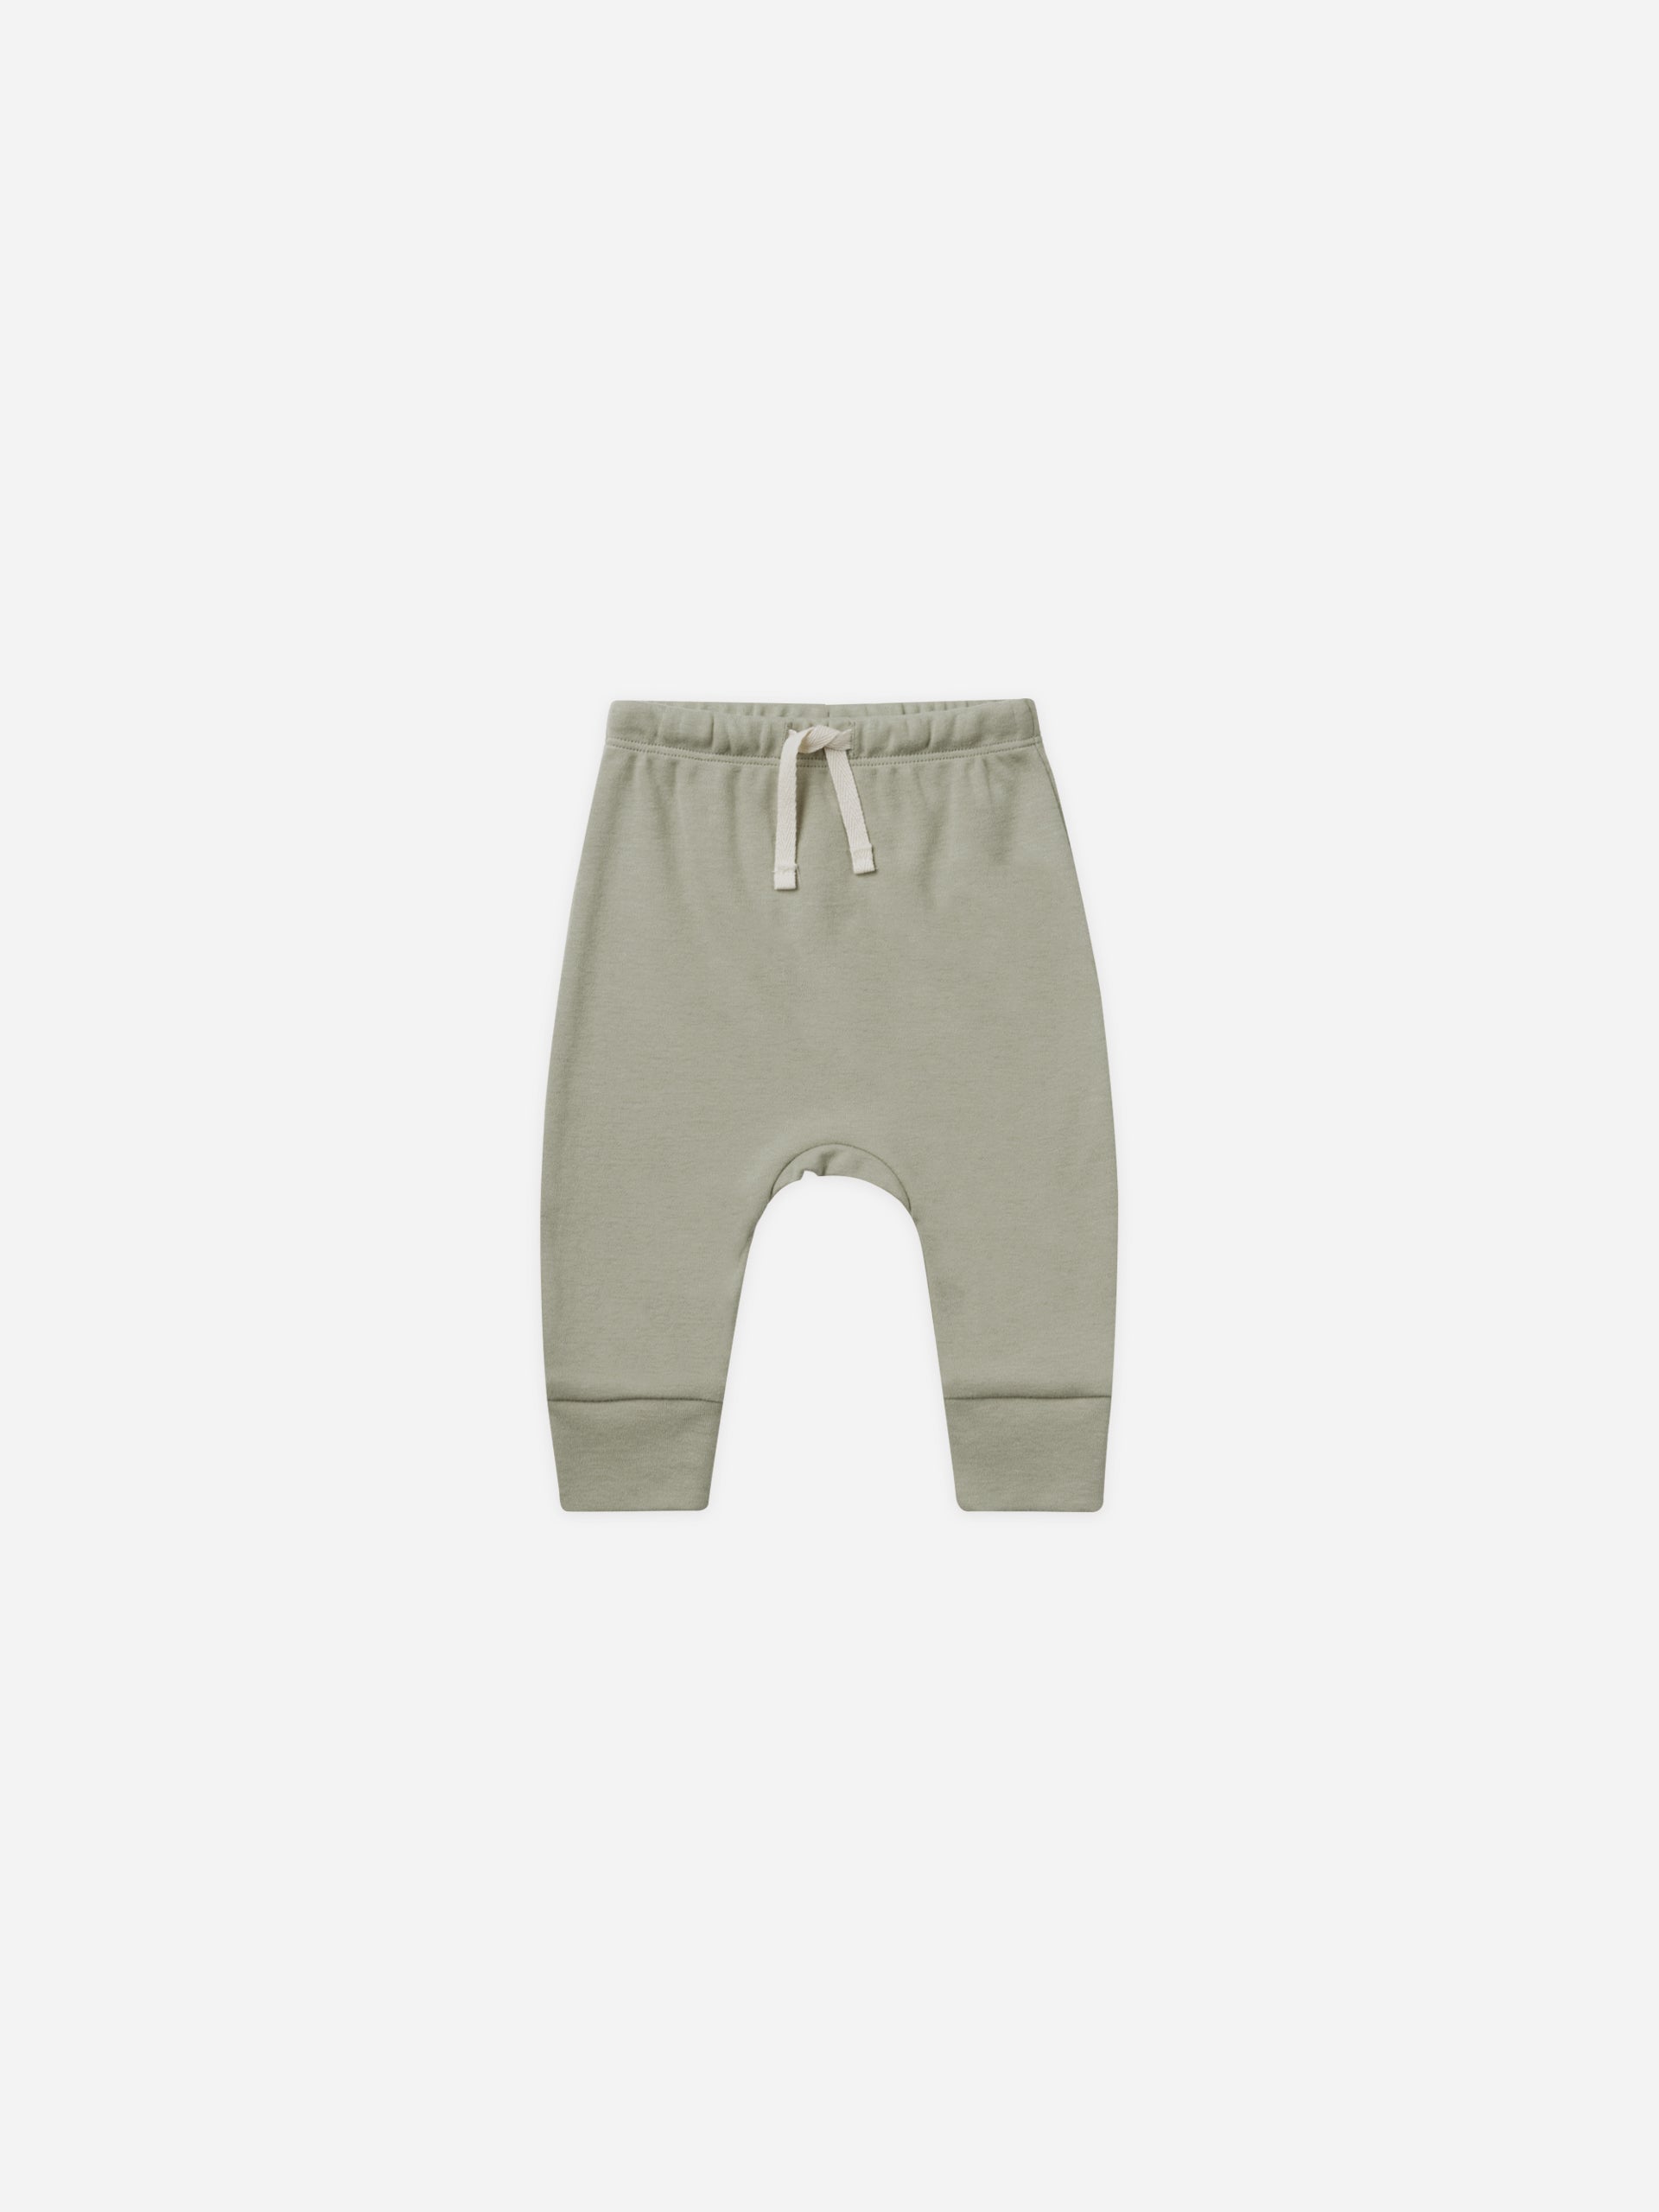 Drawstring Pant || Sage - Rylee + Cru | Kids Clothes | Trendy Baby Clothes | Modern Infant Outfits |